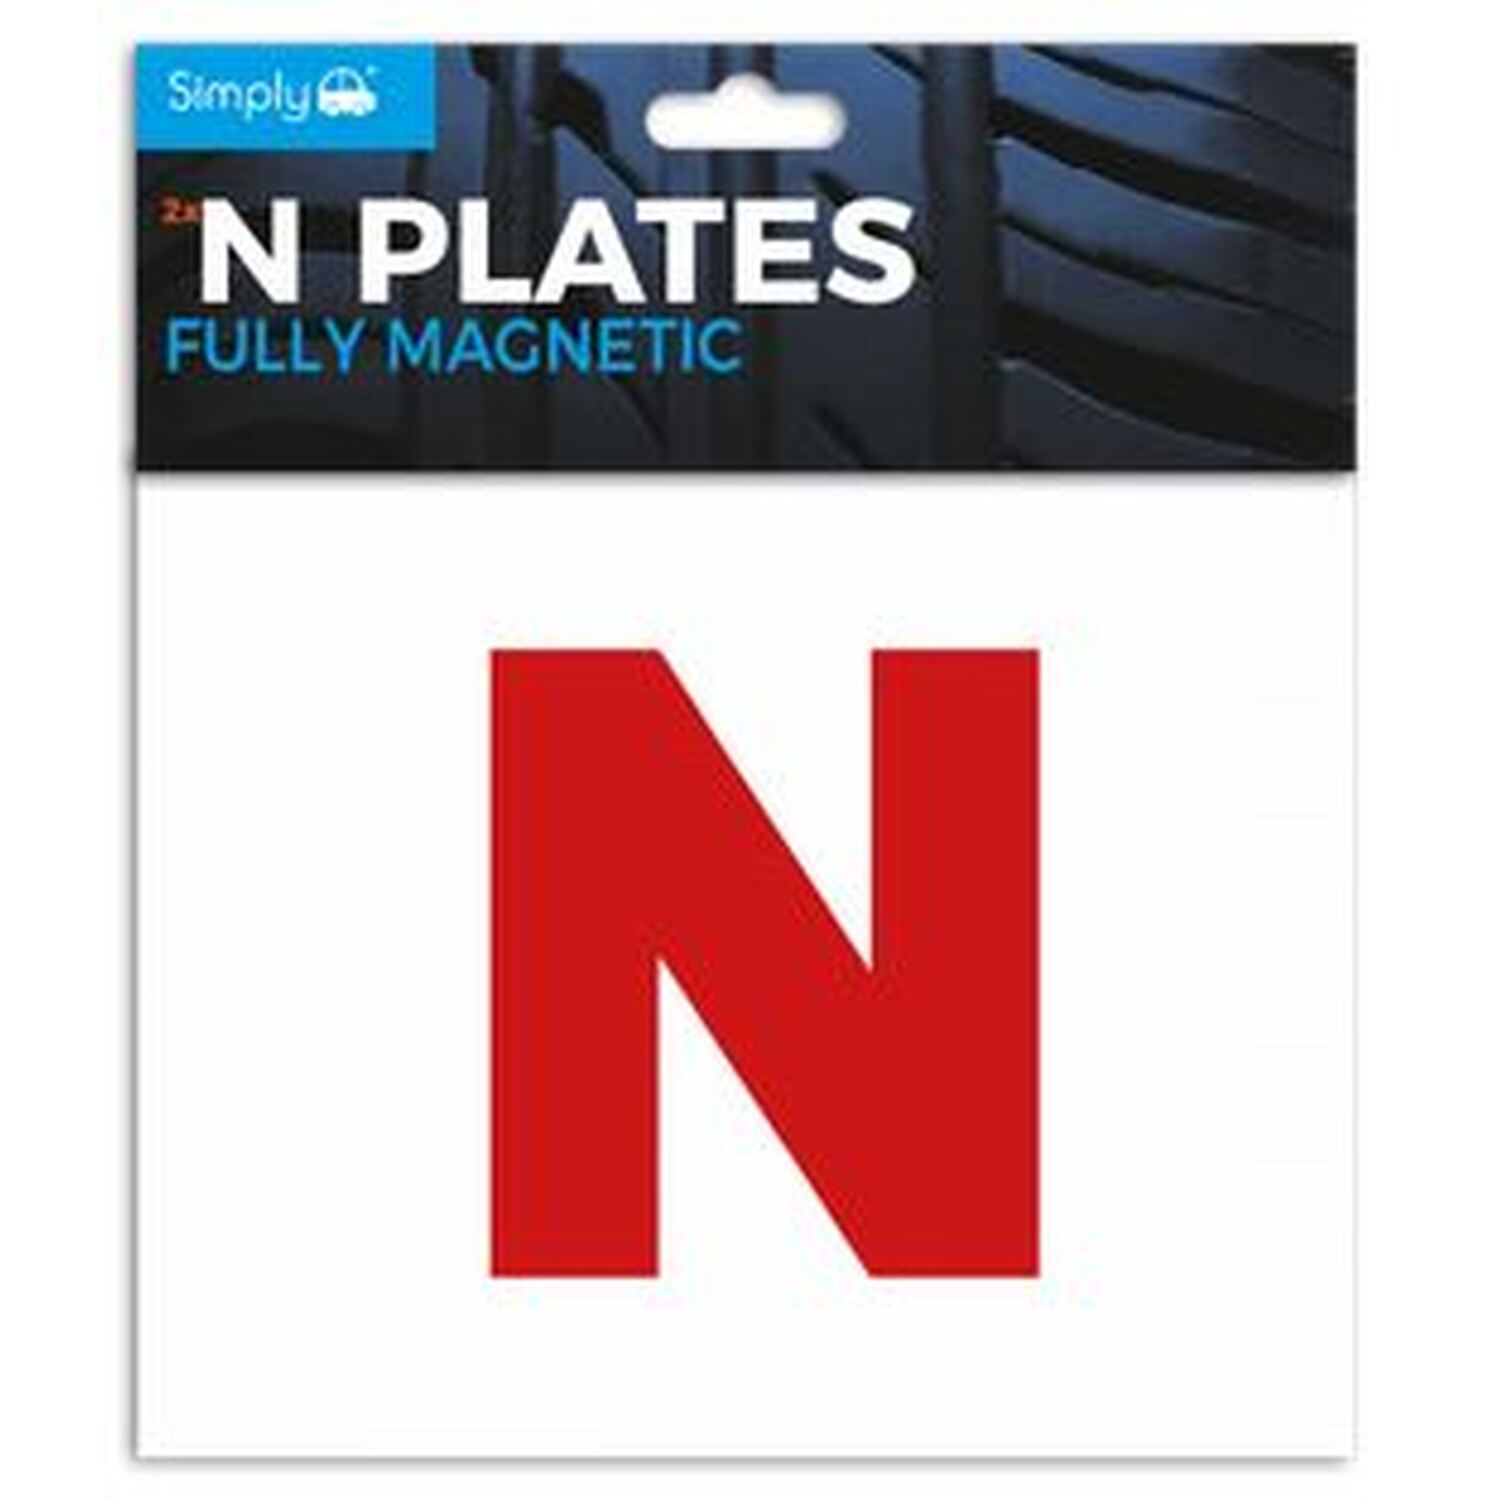 Simply Auto Fully Magnetic ROI N Plates 2 Pack Image